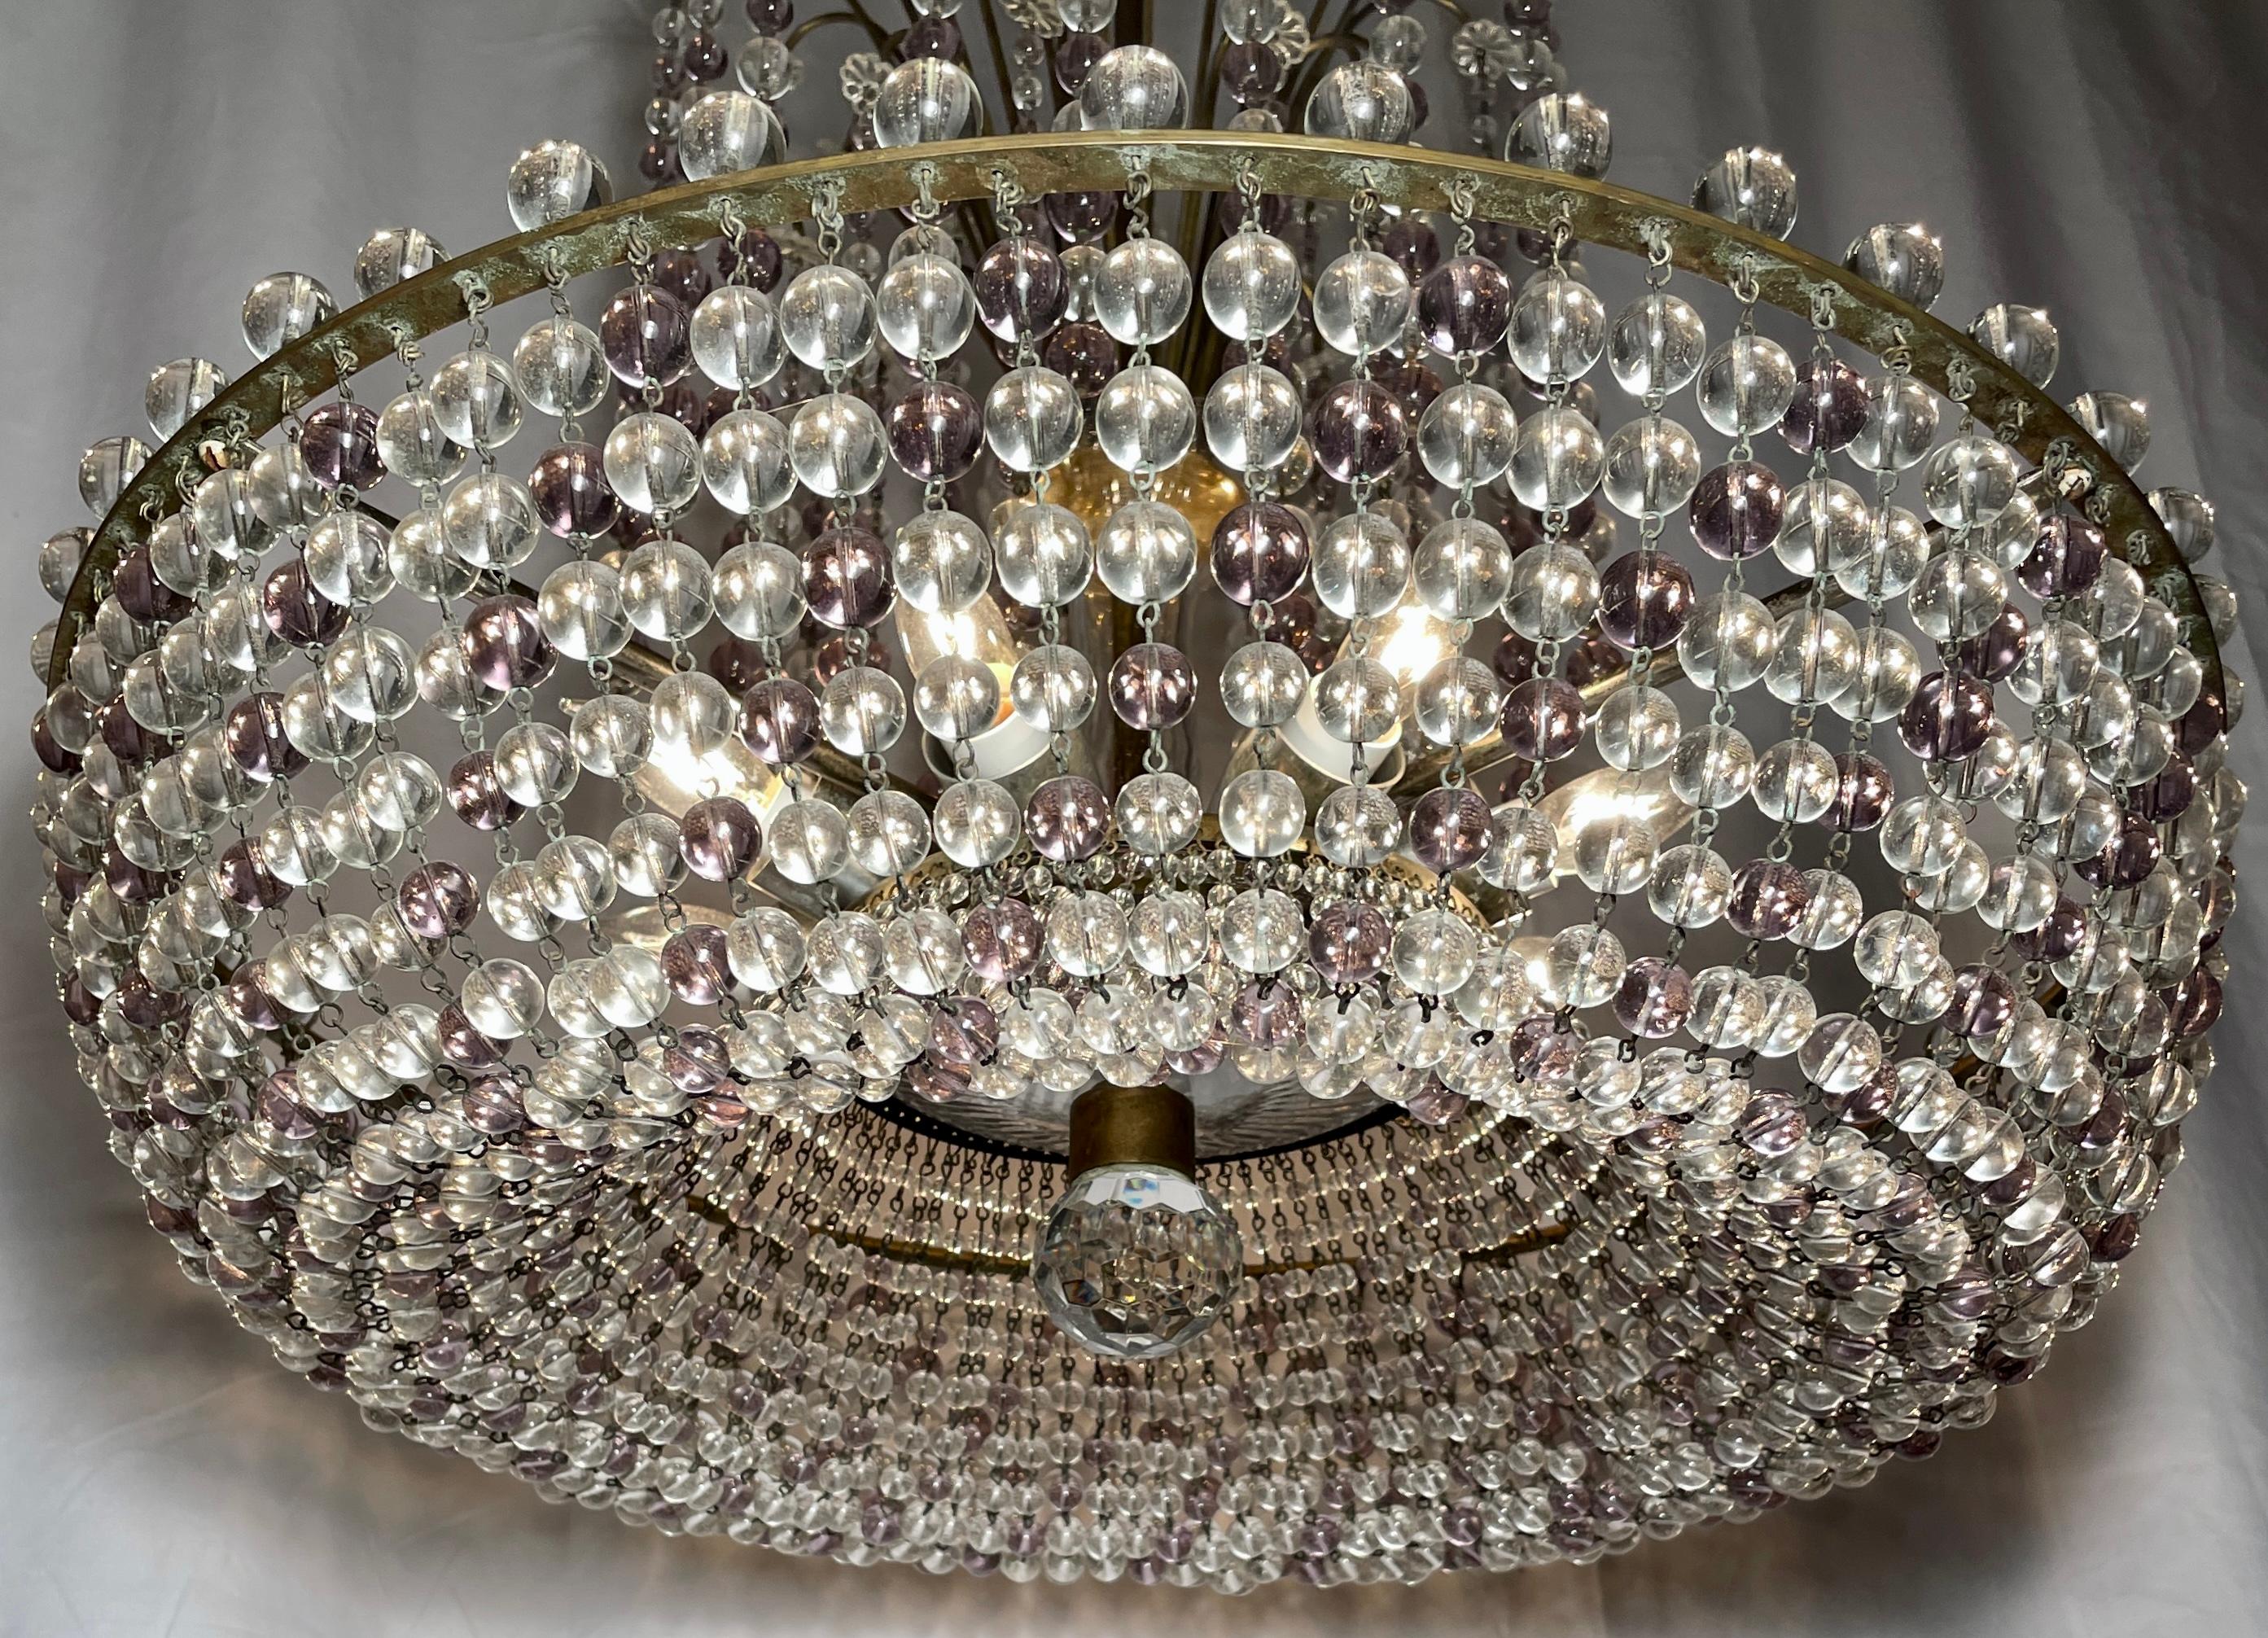 20th Century Retro Estate Amethyst and Crystal Beaded Chandelier, Circa 1950's For Sale